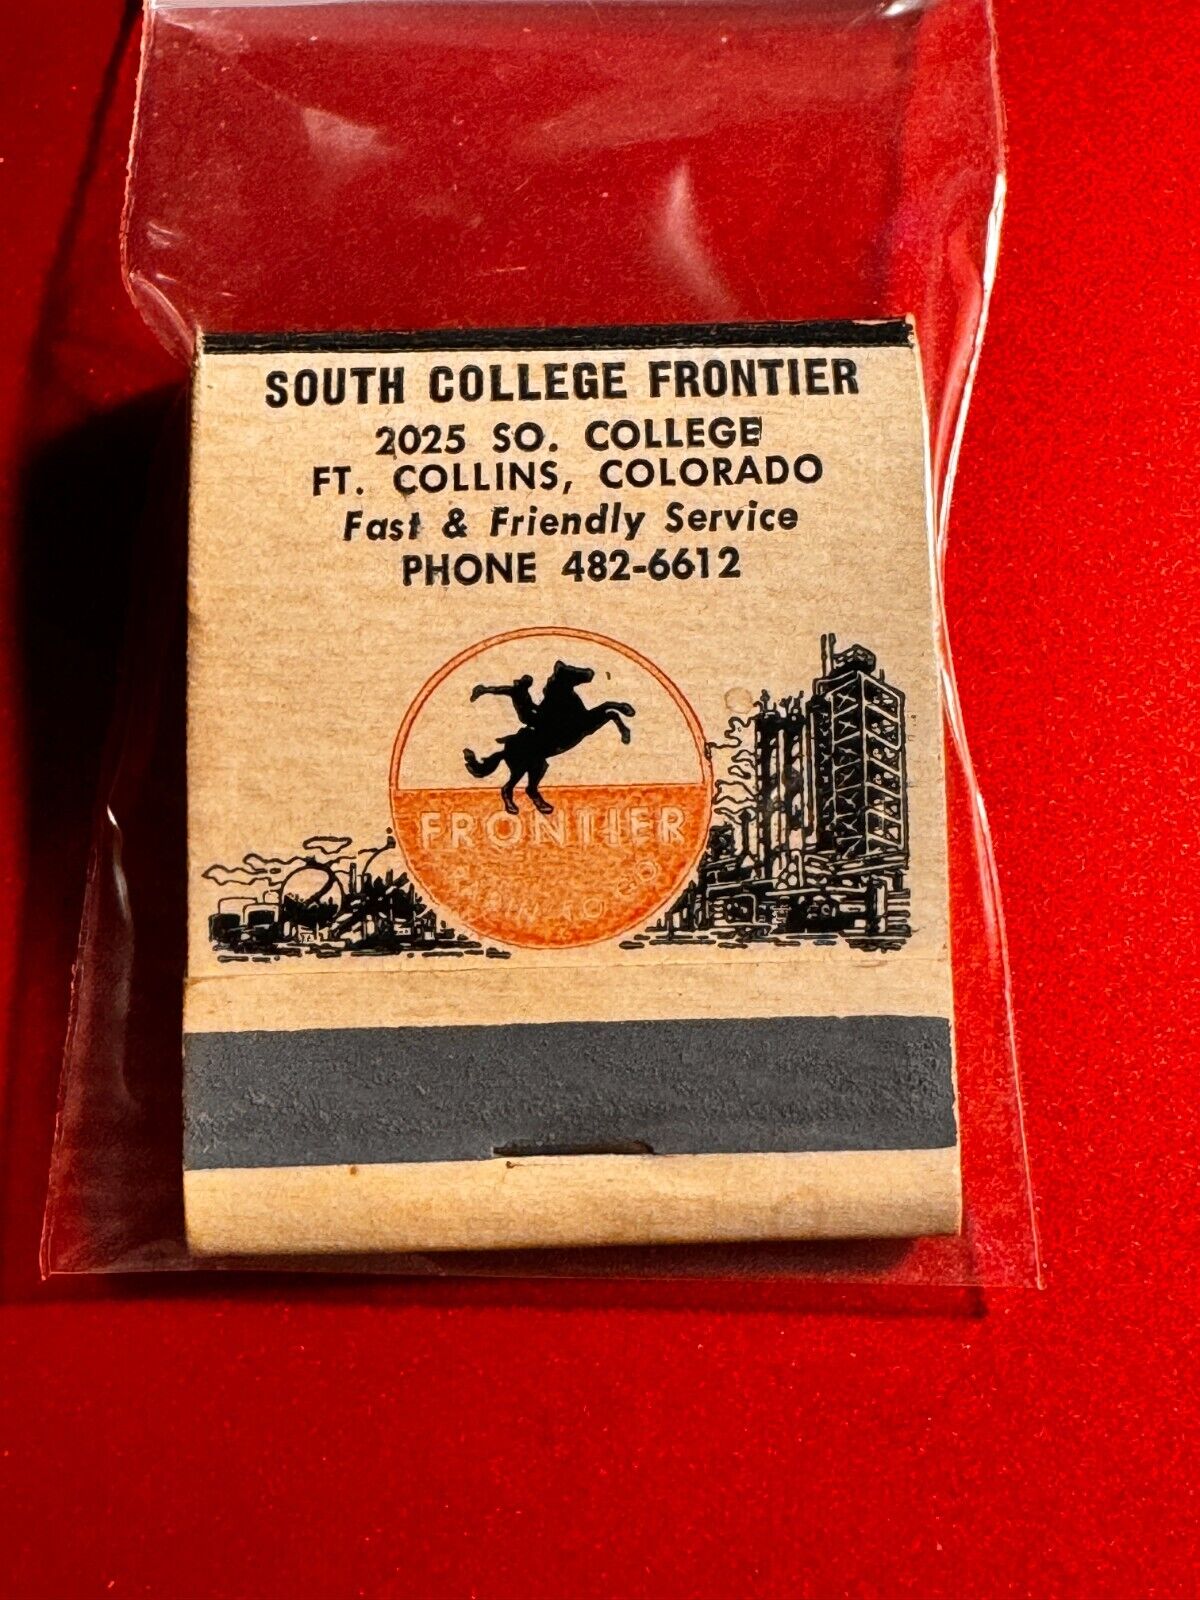 MATCHBOOK - SOUTH COLLEGE FRONTIER MOTOR OIL - FT. COLLINS, CO - UNSTRUCK